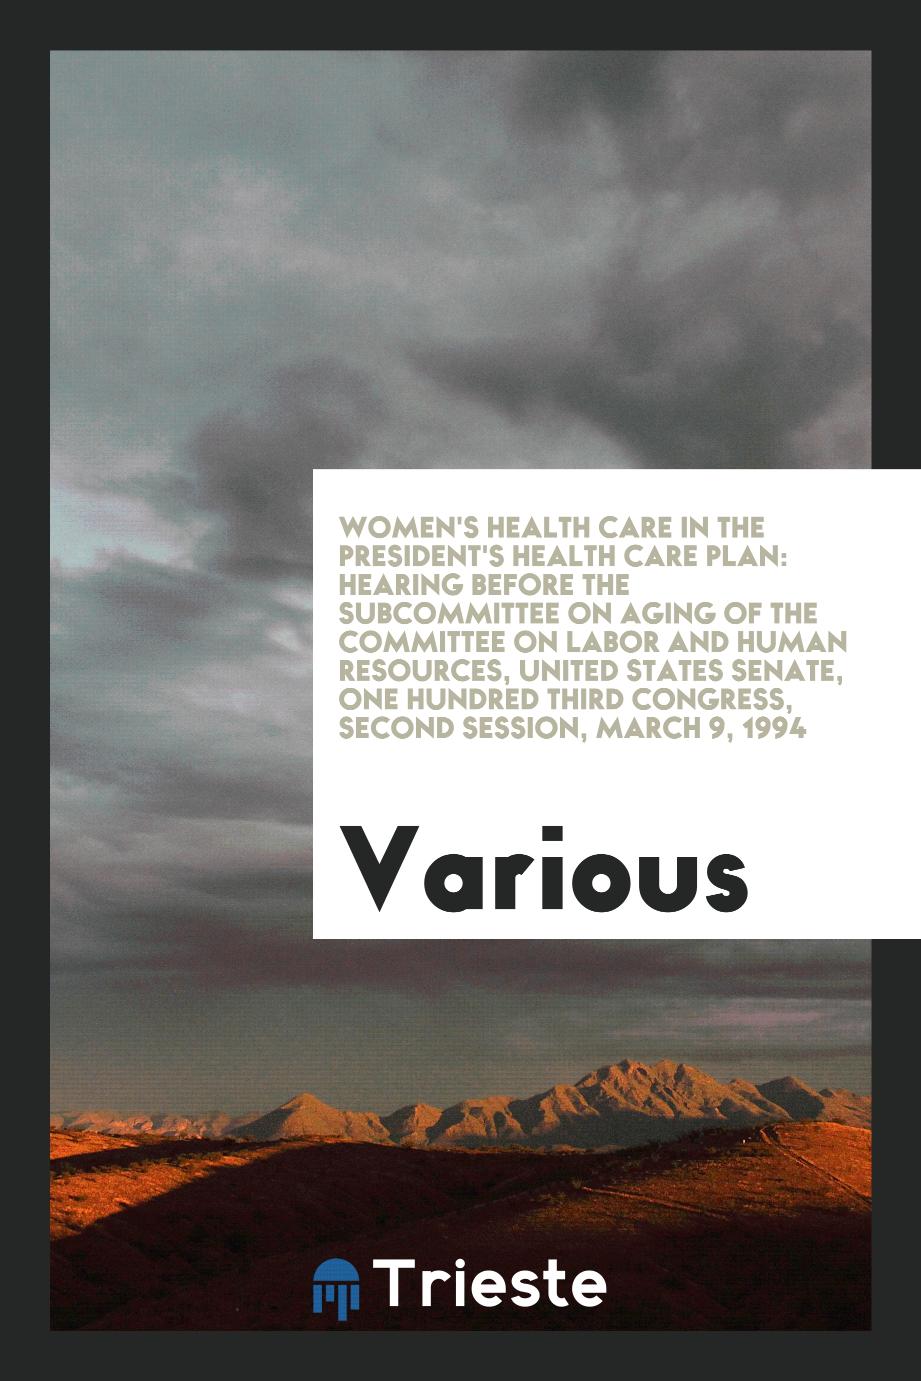 Women's health care in the President's health care plan: hearing before the Subcommittee on Aging of the Committee on Labor and Human Resources, United States Senate, One Hundred Third Congress, second session, March 9, 1994